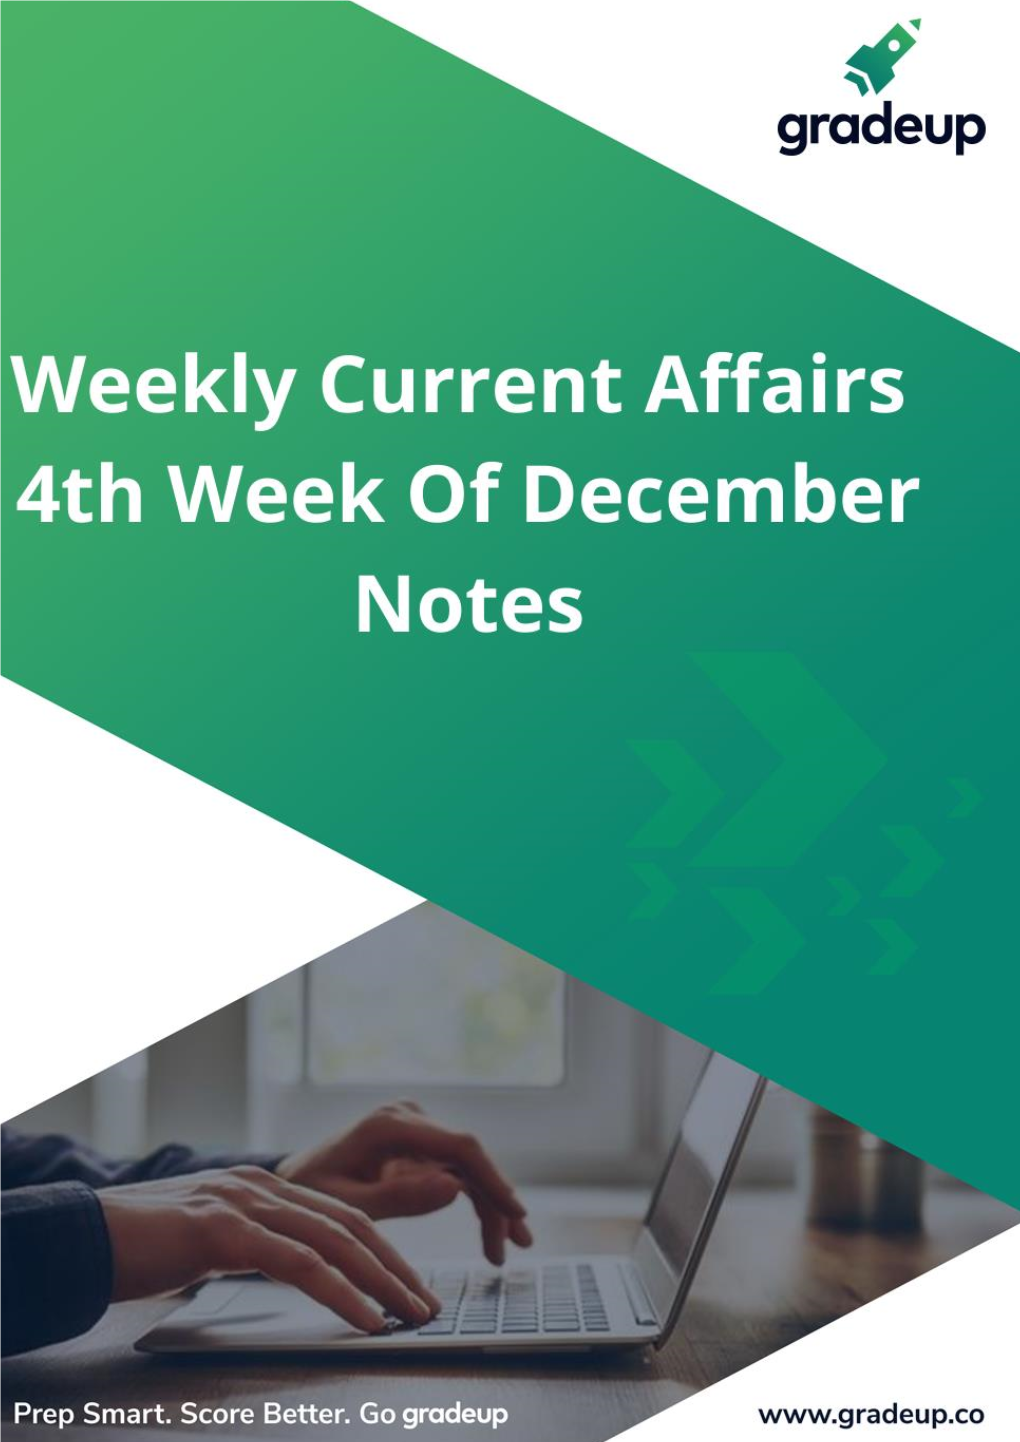 Weekly Current Affairs Notes 4Th Week of December